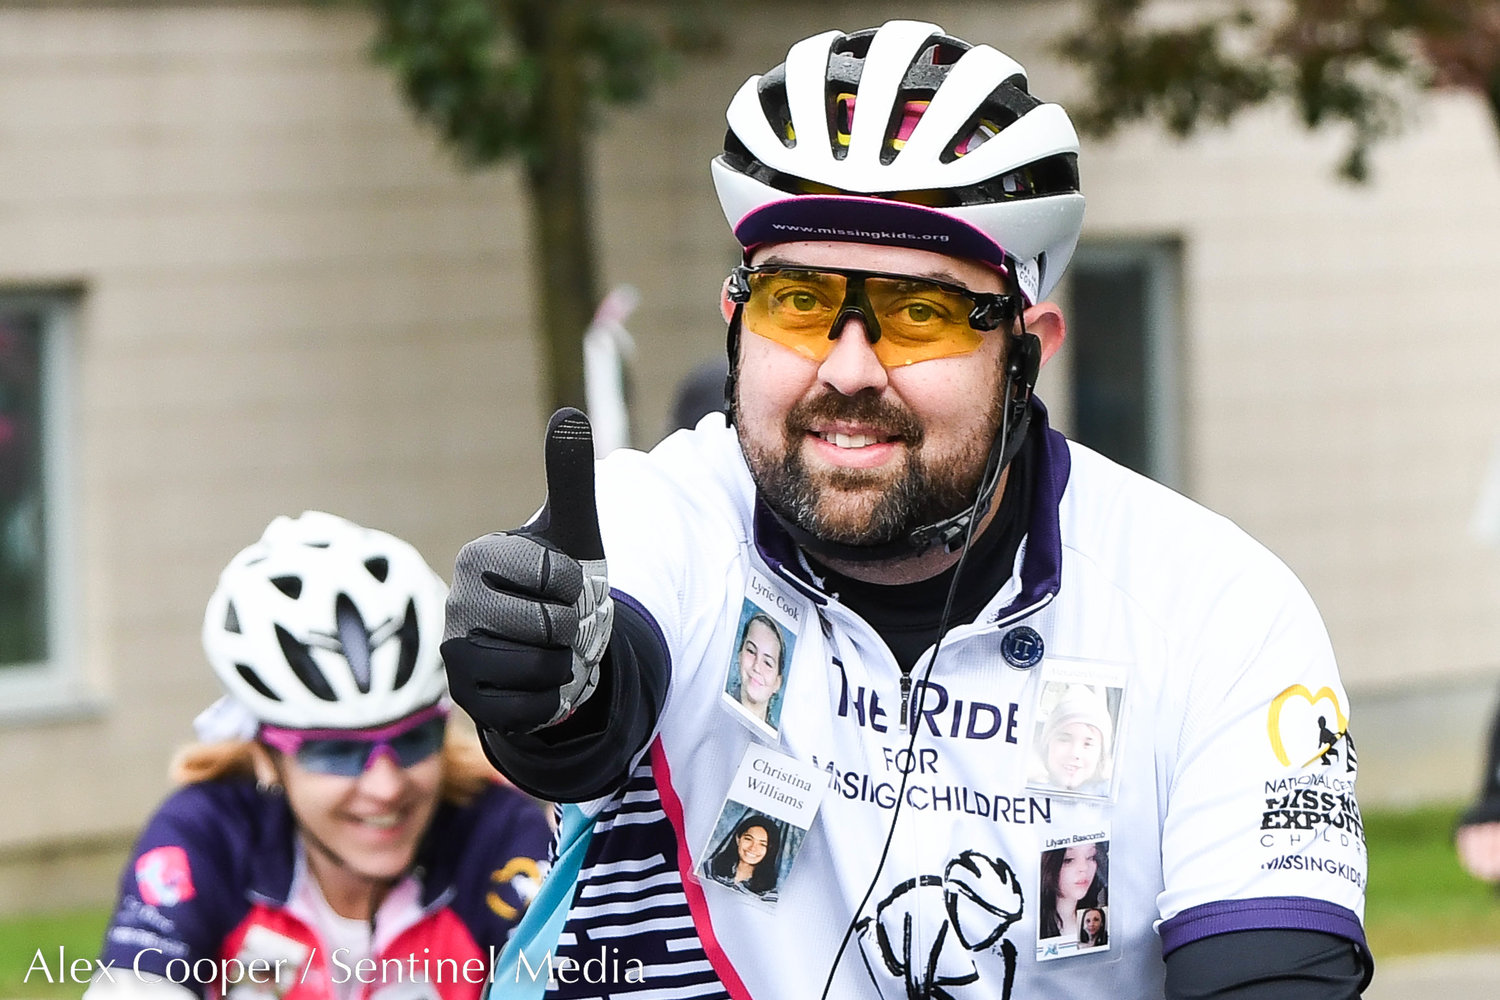 A rider gives a thumbs up after a short break during the 24th annual Ride For Missing Children on Wednesday, Sept. 28 outside of Gregory B. Jarvis Middle School in Mohawk.